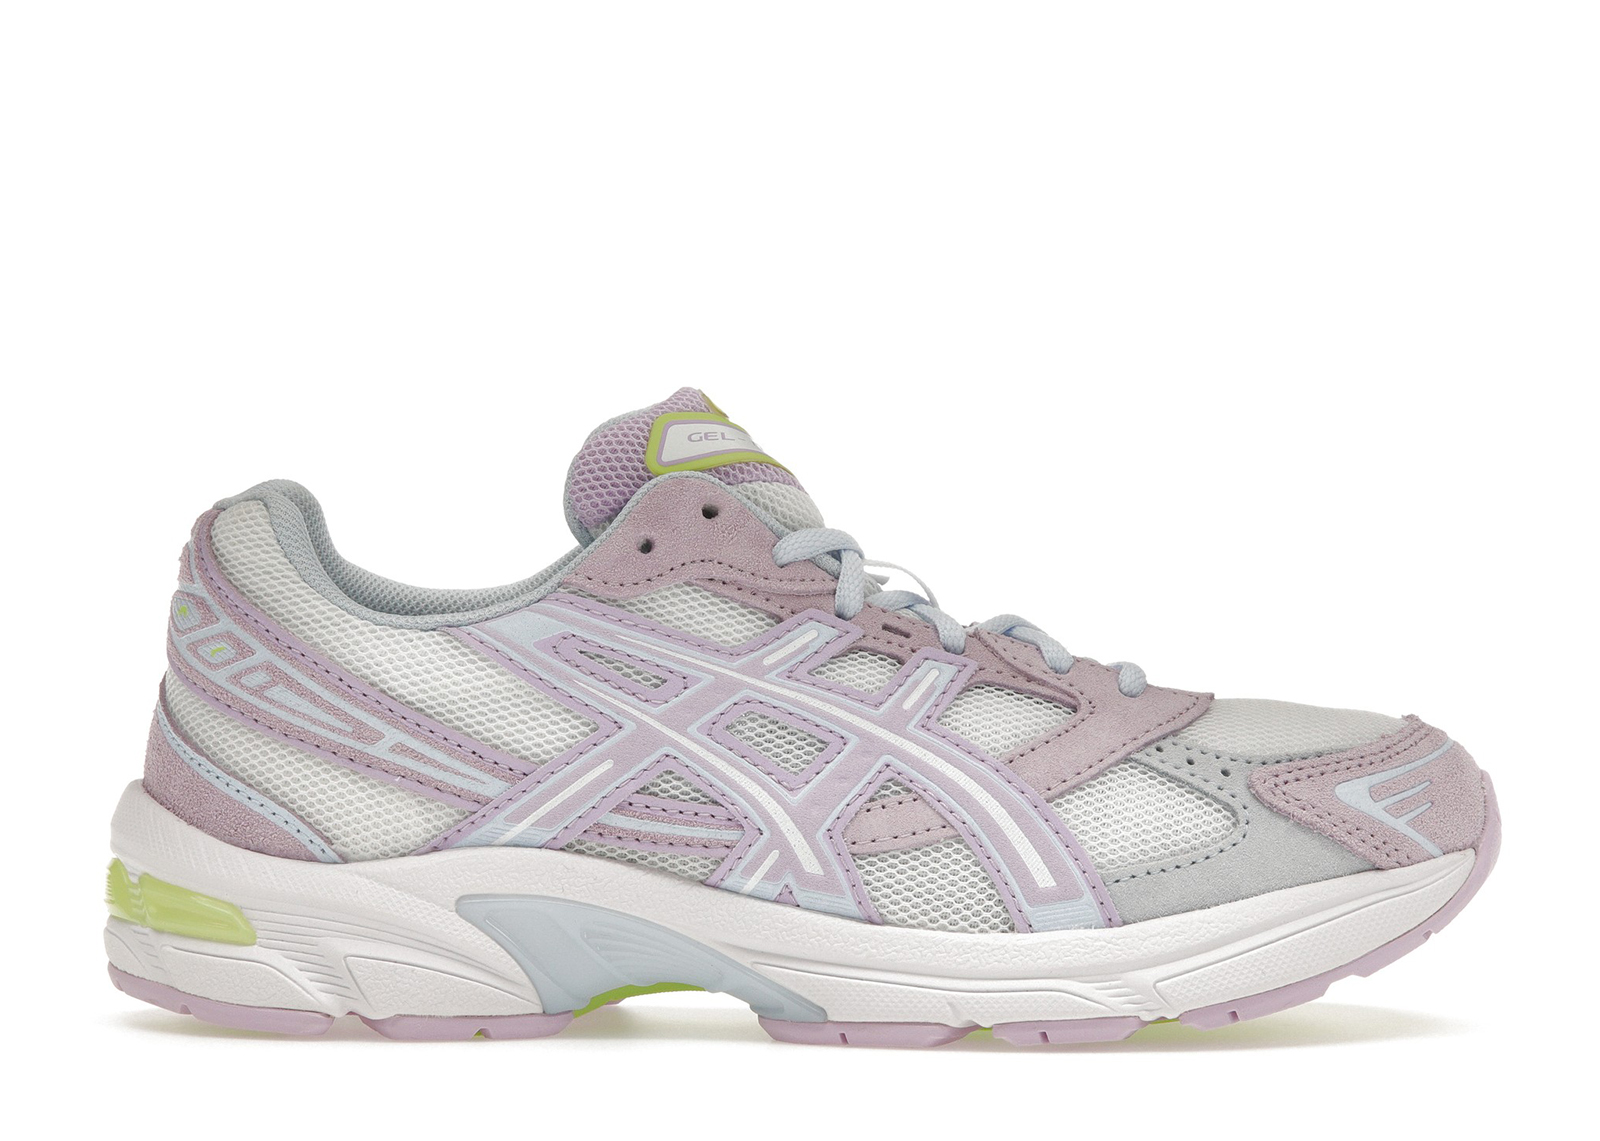 Buy ASICS Gel-1130 Shoes & New Sneakers - StockX